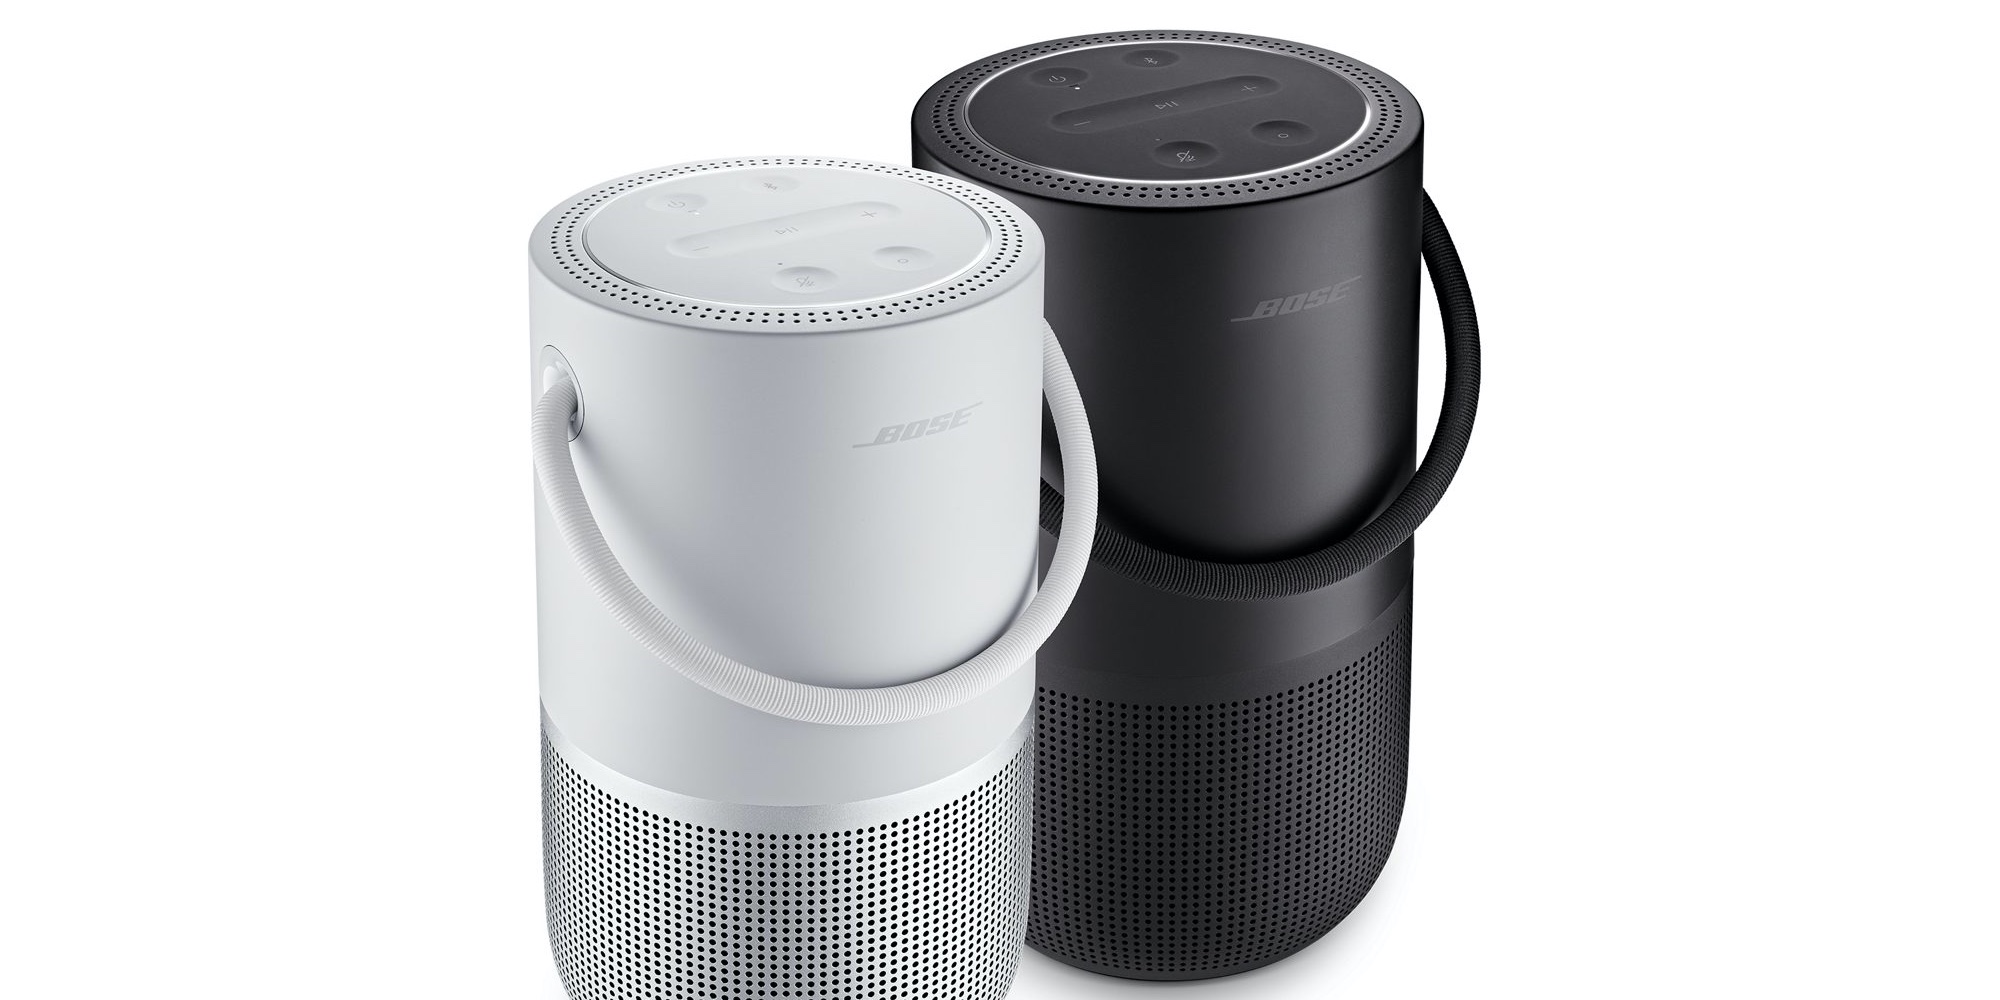 Bose Smart Speaker with AirPlay sees first discount in 6 from $299